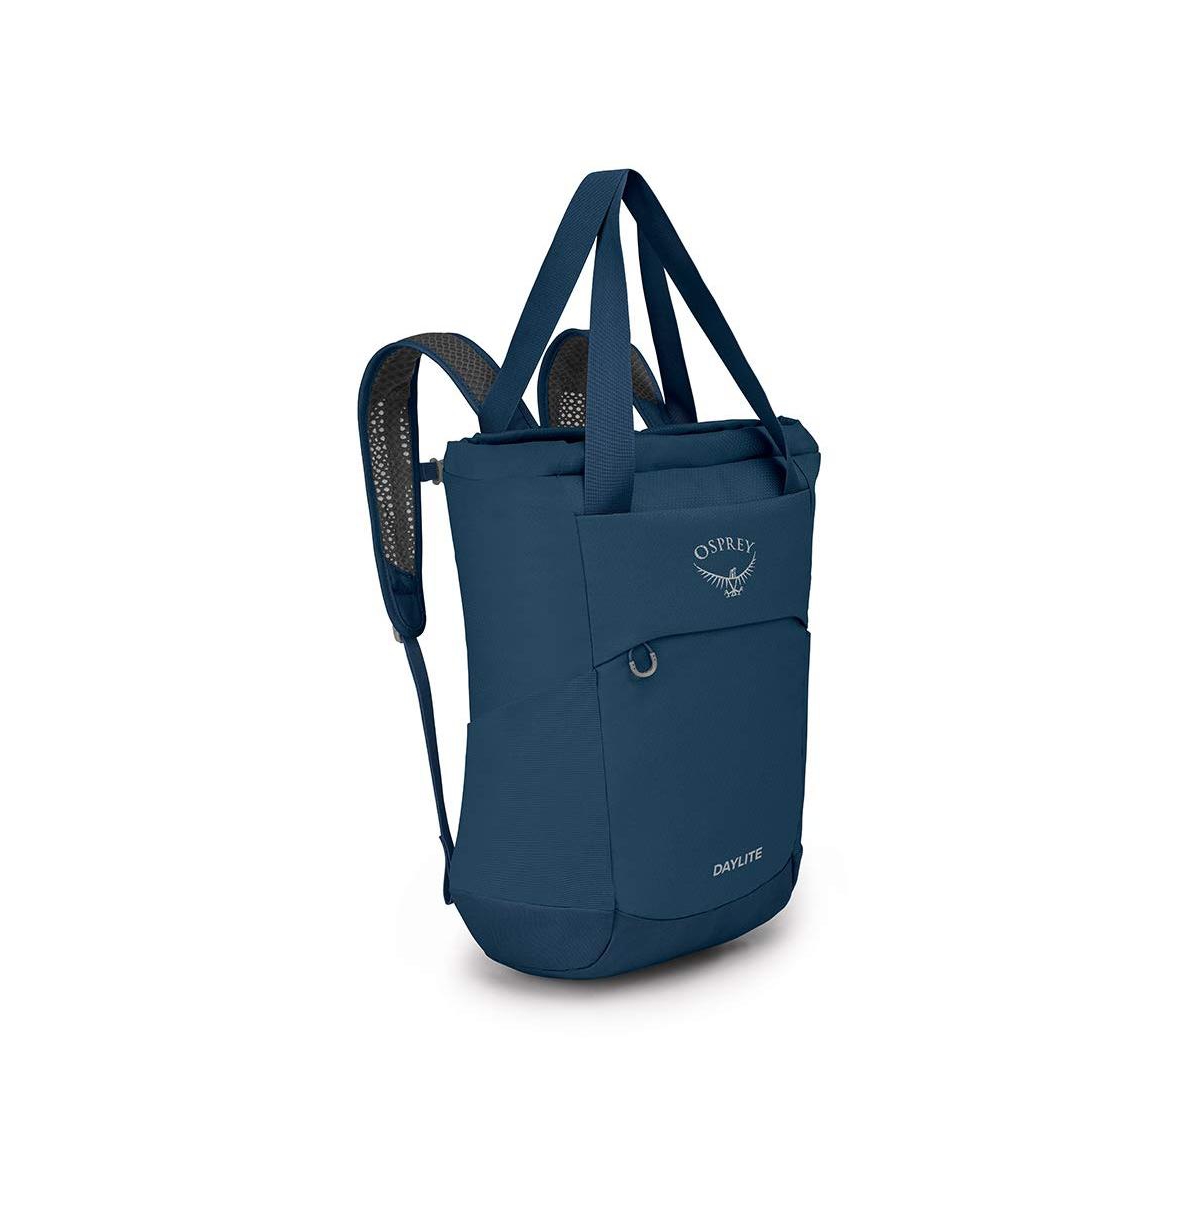 Daylite Tote Pack - Wave blue